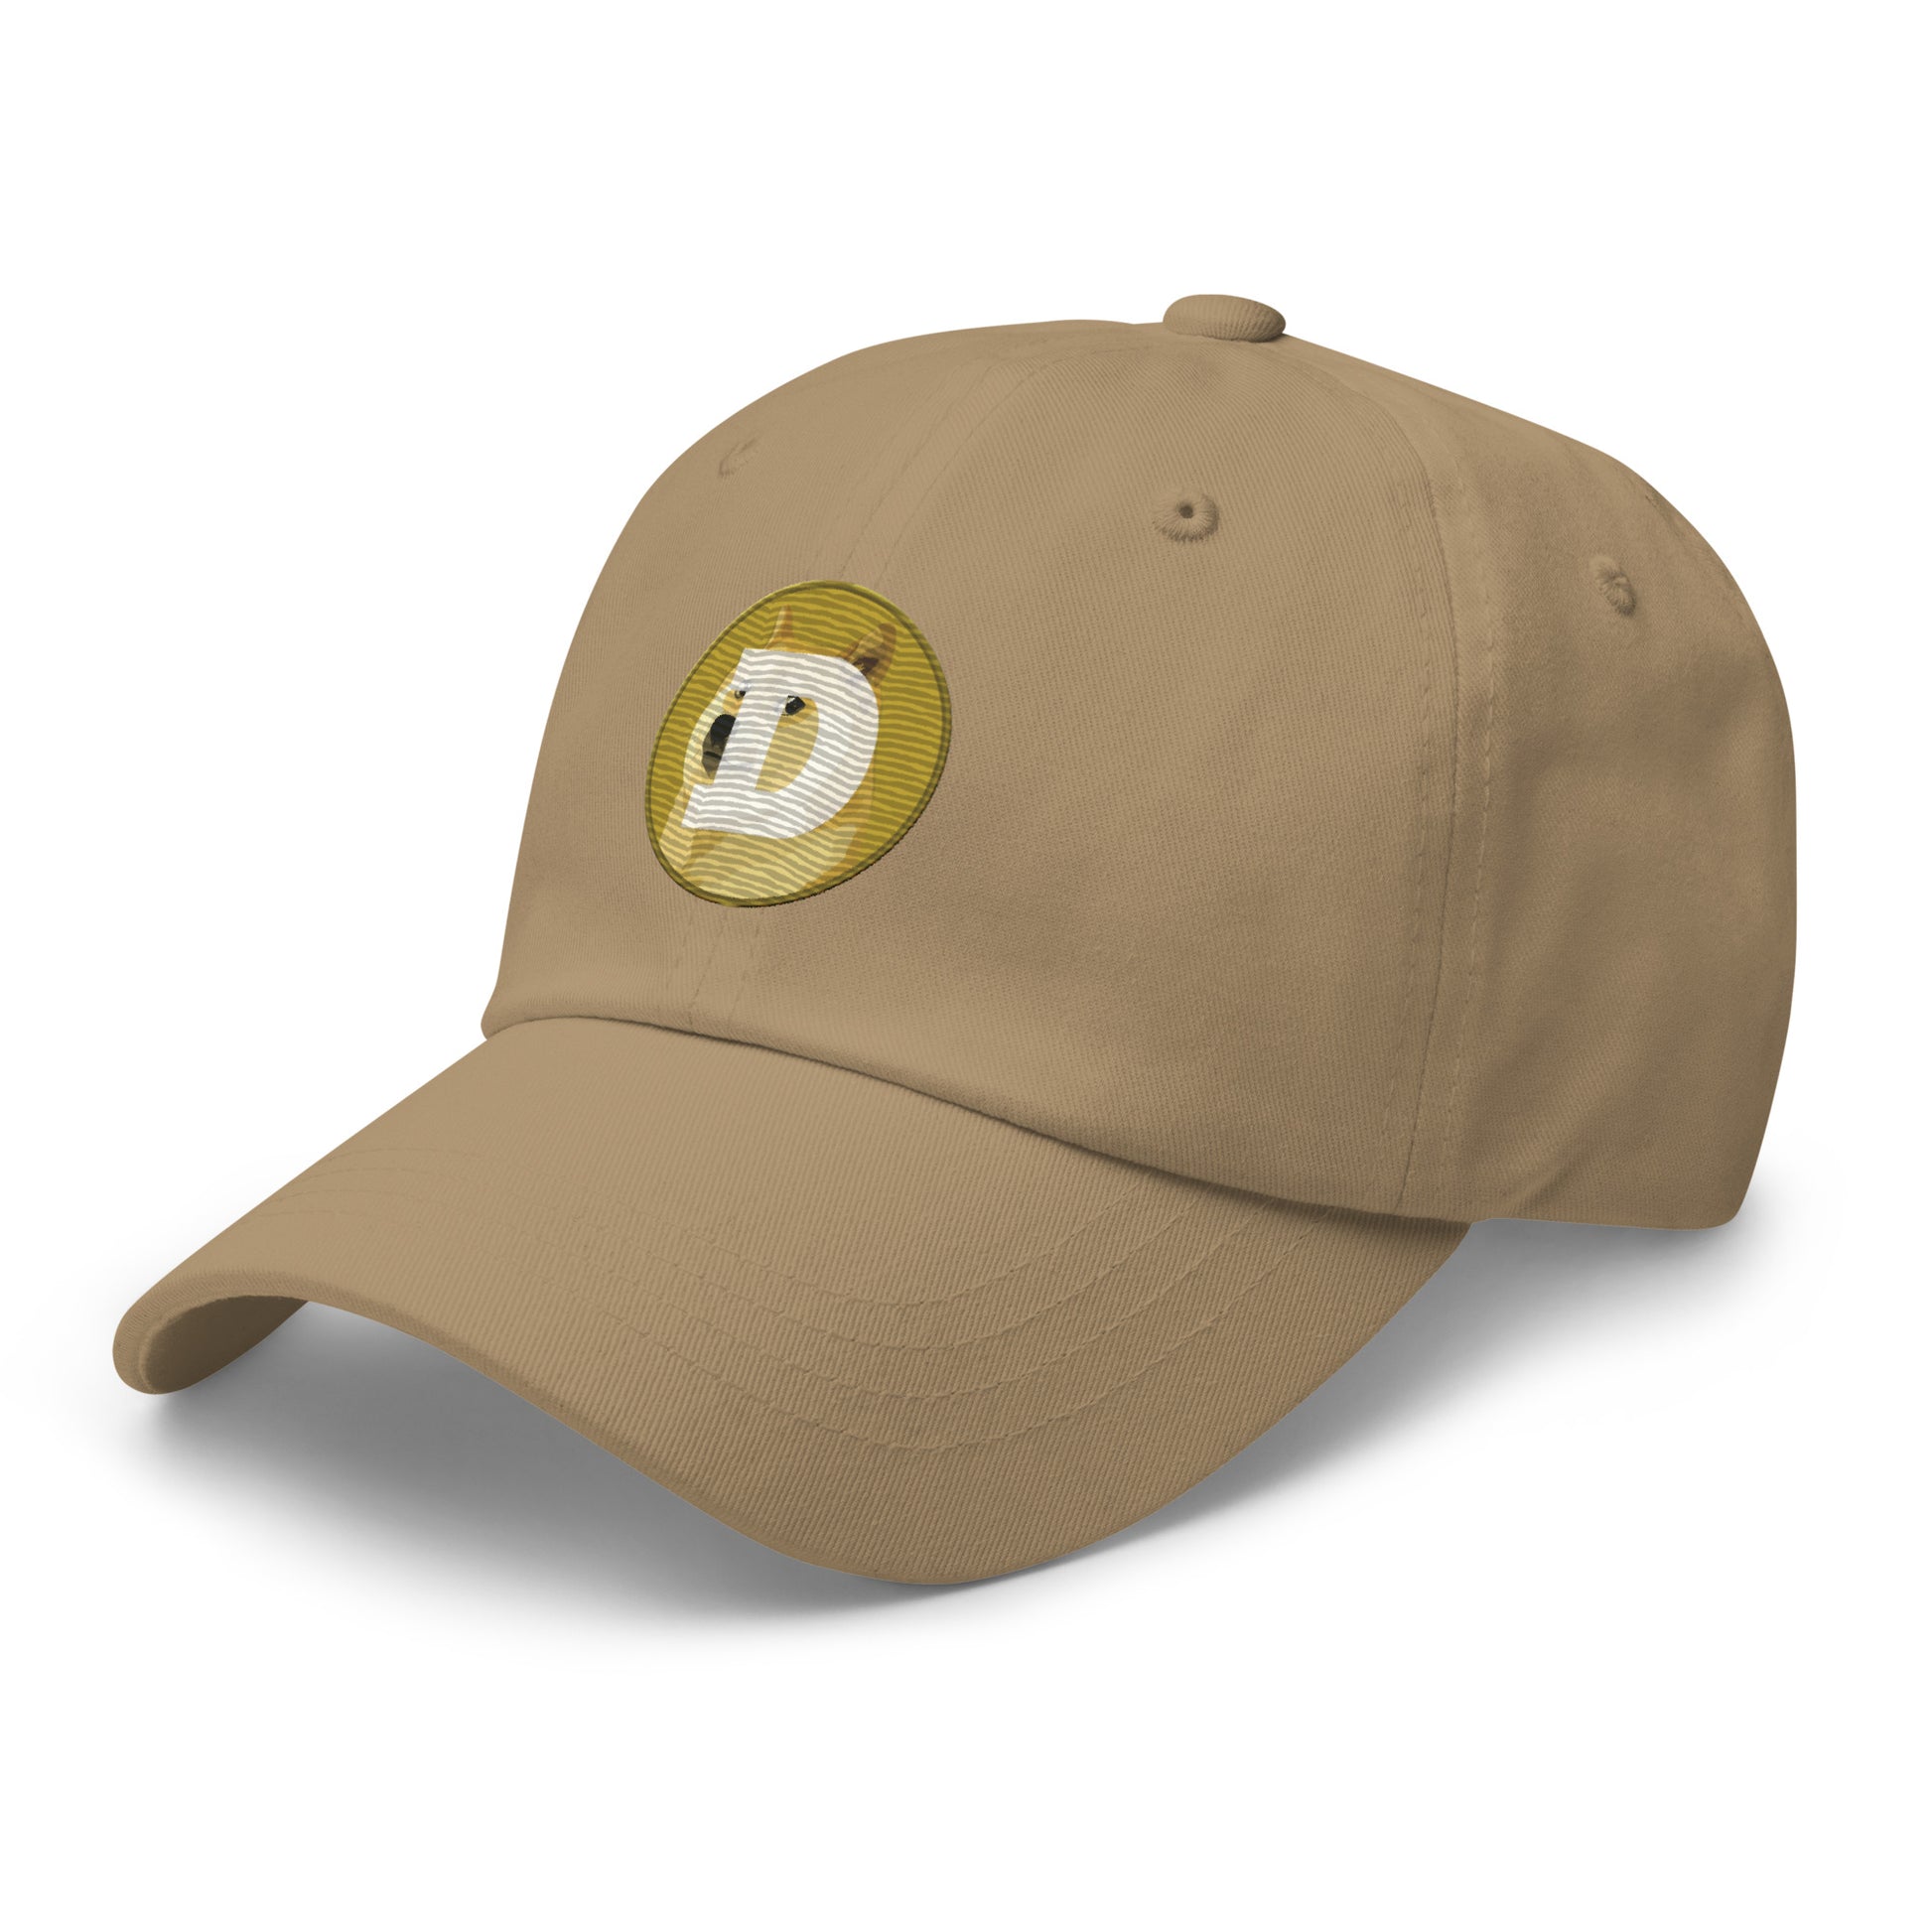 Doge Coin Dad hat - Hodlers Crypto Merch Brand